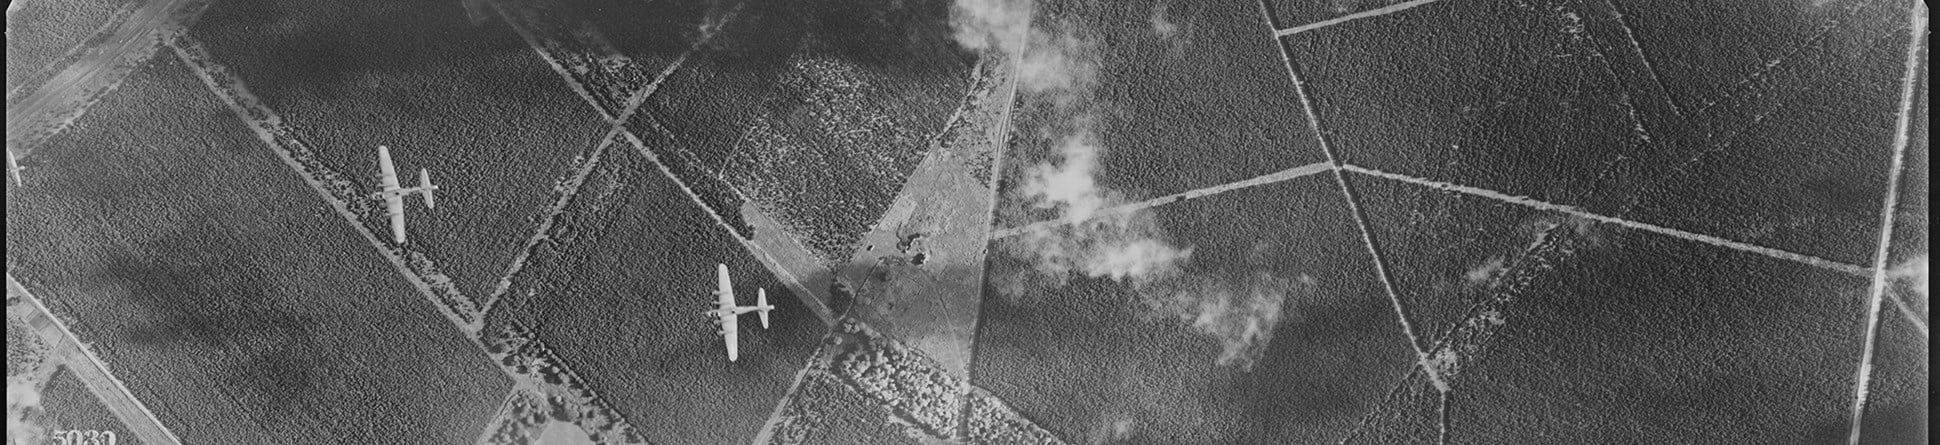 A black and white vertical aerial photograph of three military aircraft flying over a patchwork of plantations. Clouds obscure parts of the photograph and cast shadows on the ground.